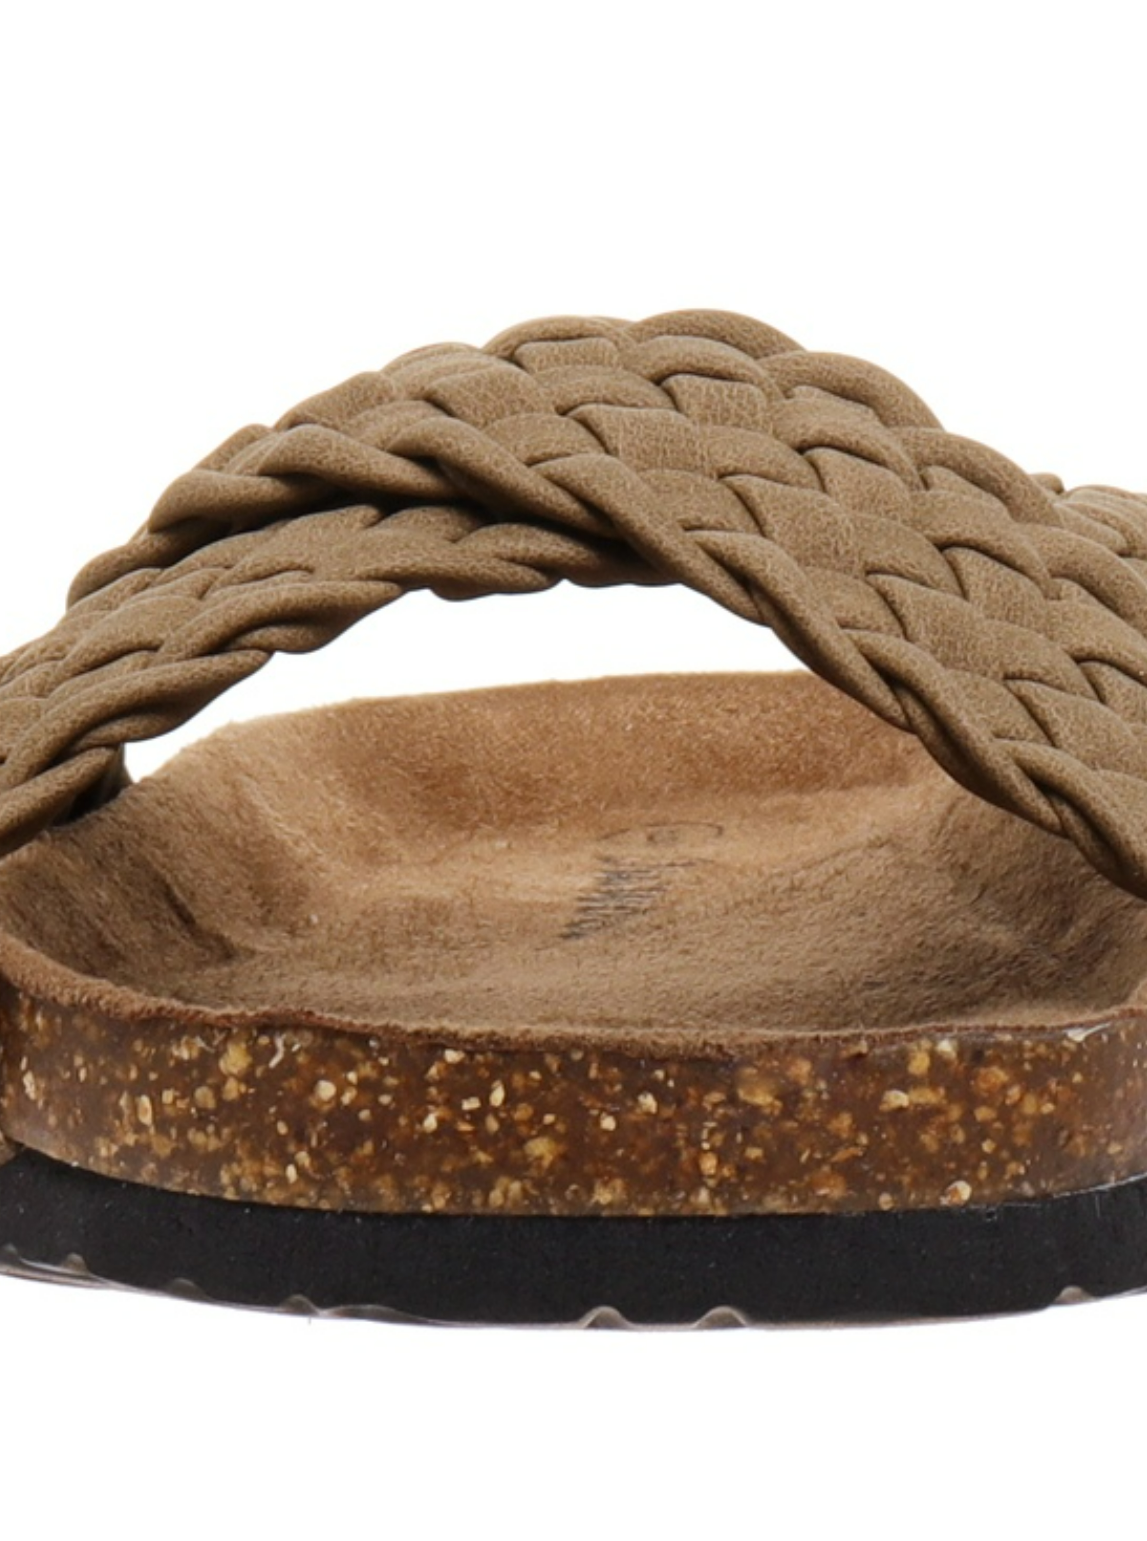 Outwood Bork Slip-on Sandal with Braided Straps in Taupe- Final Sale    Shoes Olem Shoe Corp- Tilden Co.